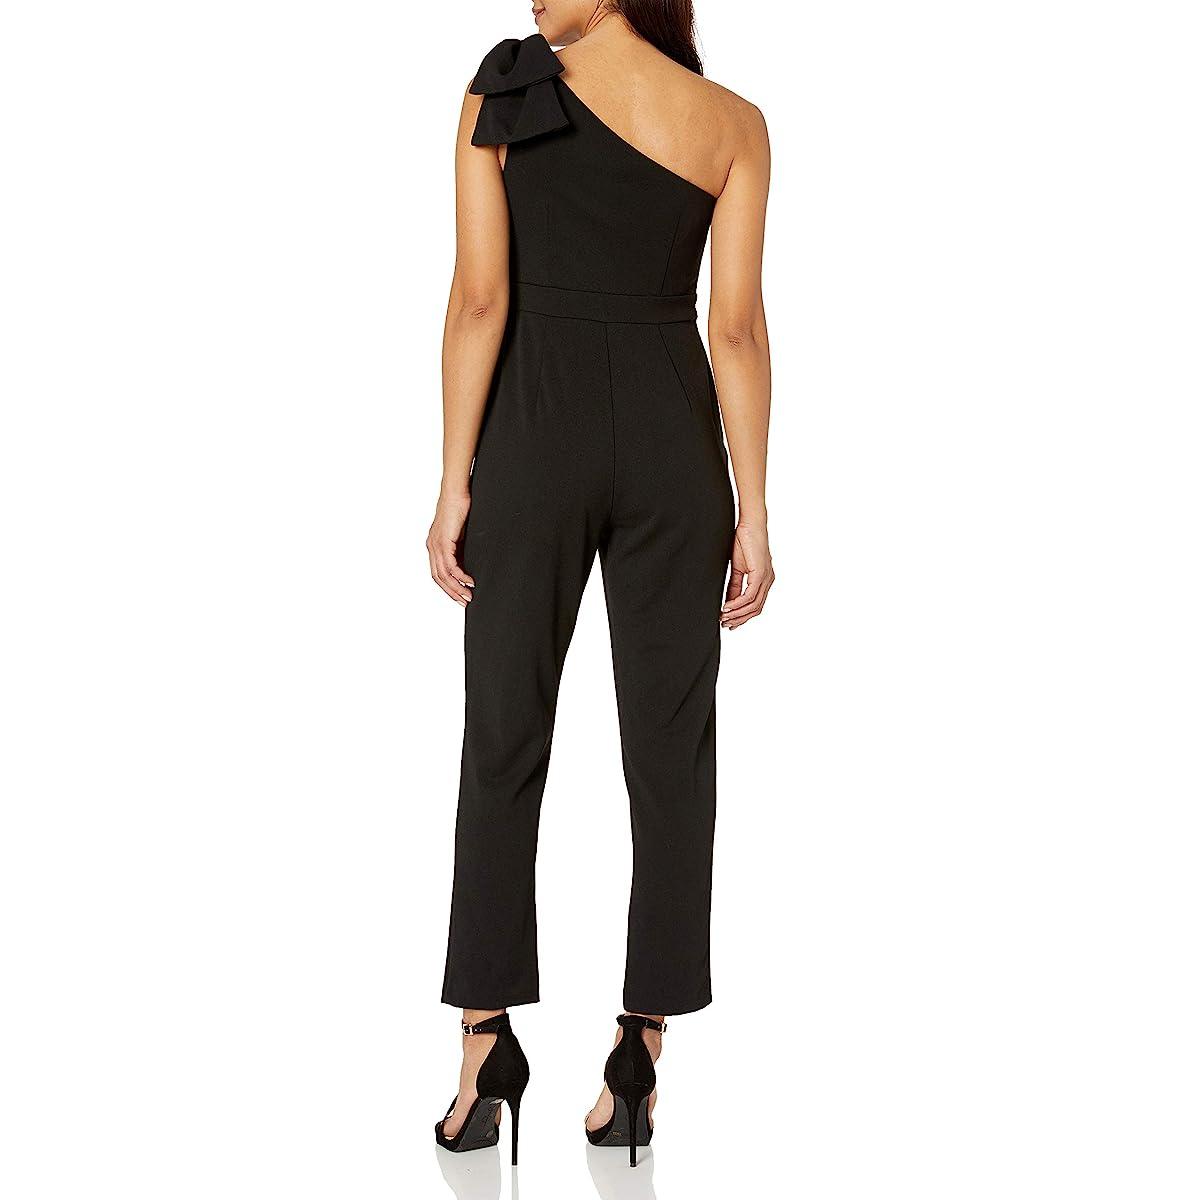 Adrianna Papell Formal Jumpsuit Sale